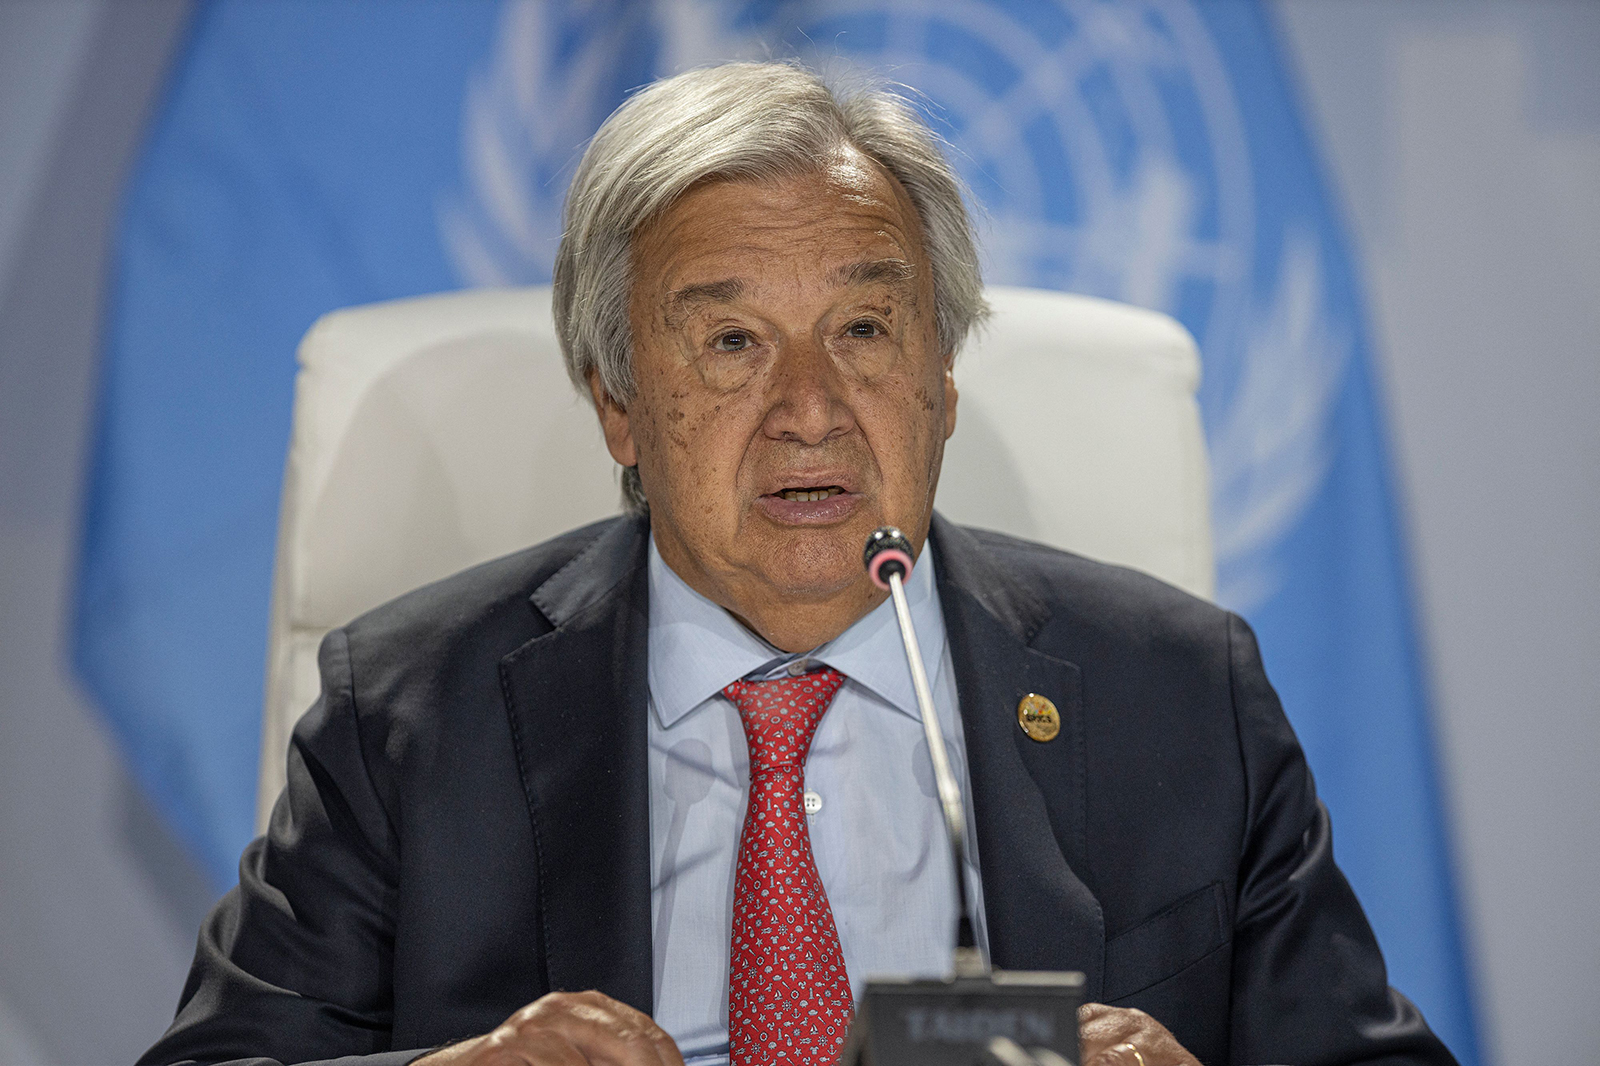 Antonio Guterres talks at a press conference in Johannesburg on August 24.